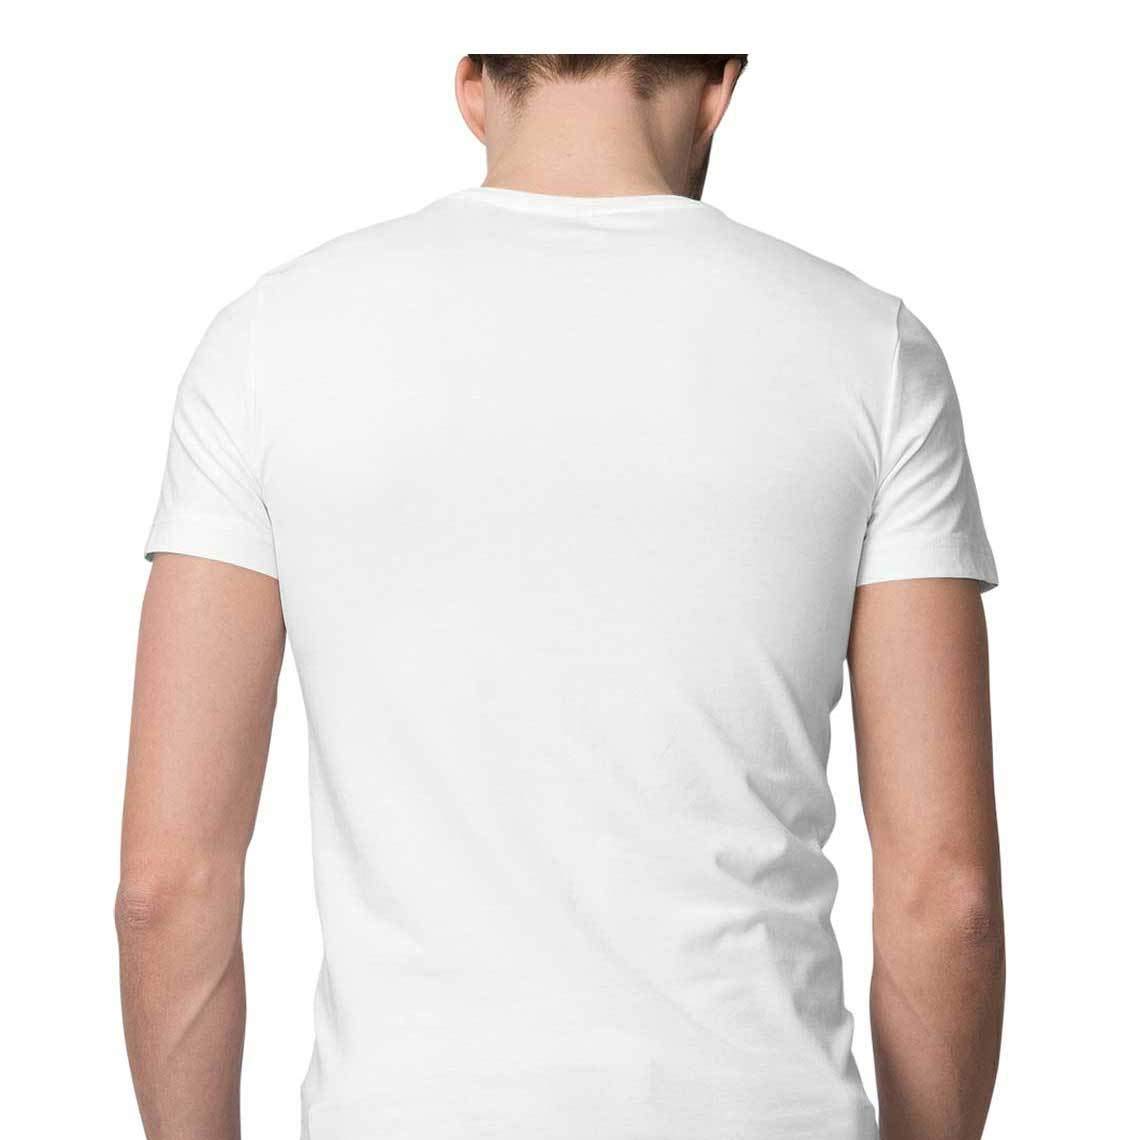 Fathers day Printed Tshirt for Men|Graphic Printed White t shirts for dads|I love dad